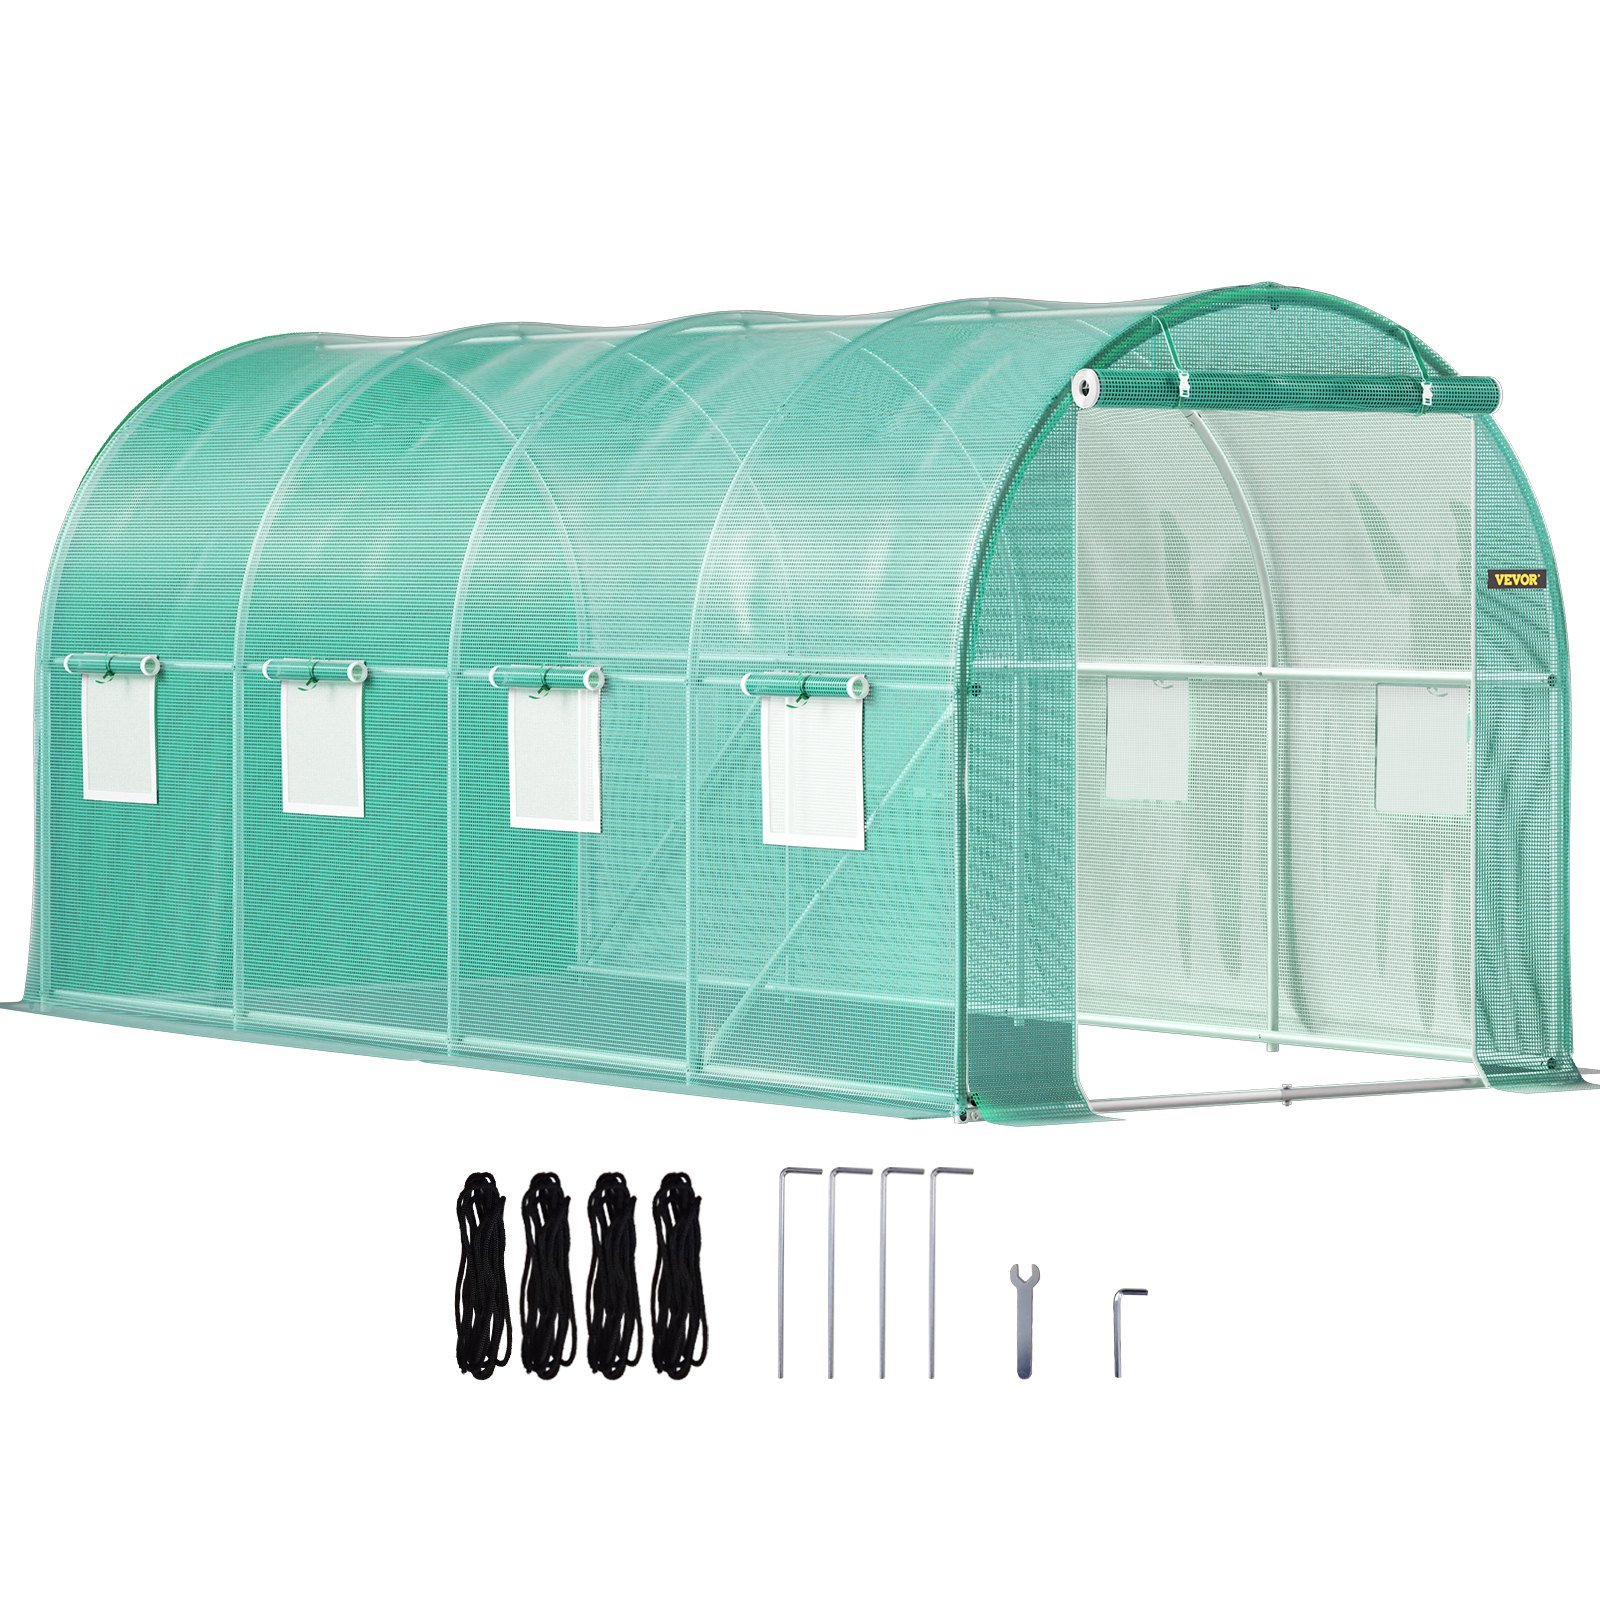 VEVOR Walk-in Tunnel Greenhouse, 14.8x6.6x6.6 ft Portable Plant Hot House w/ Galvanized Steel Hoops,